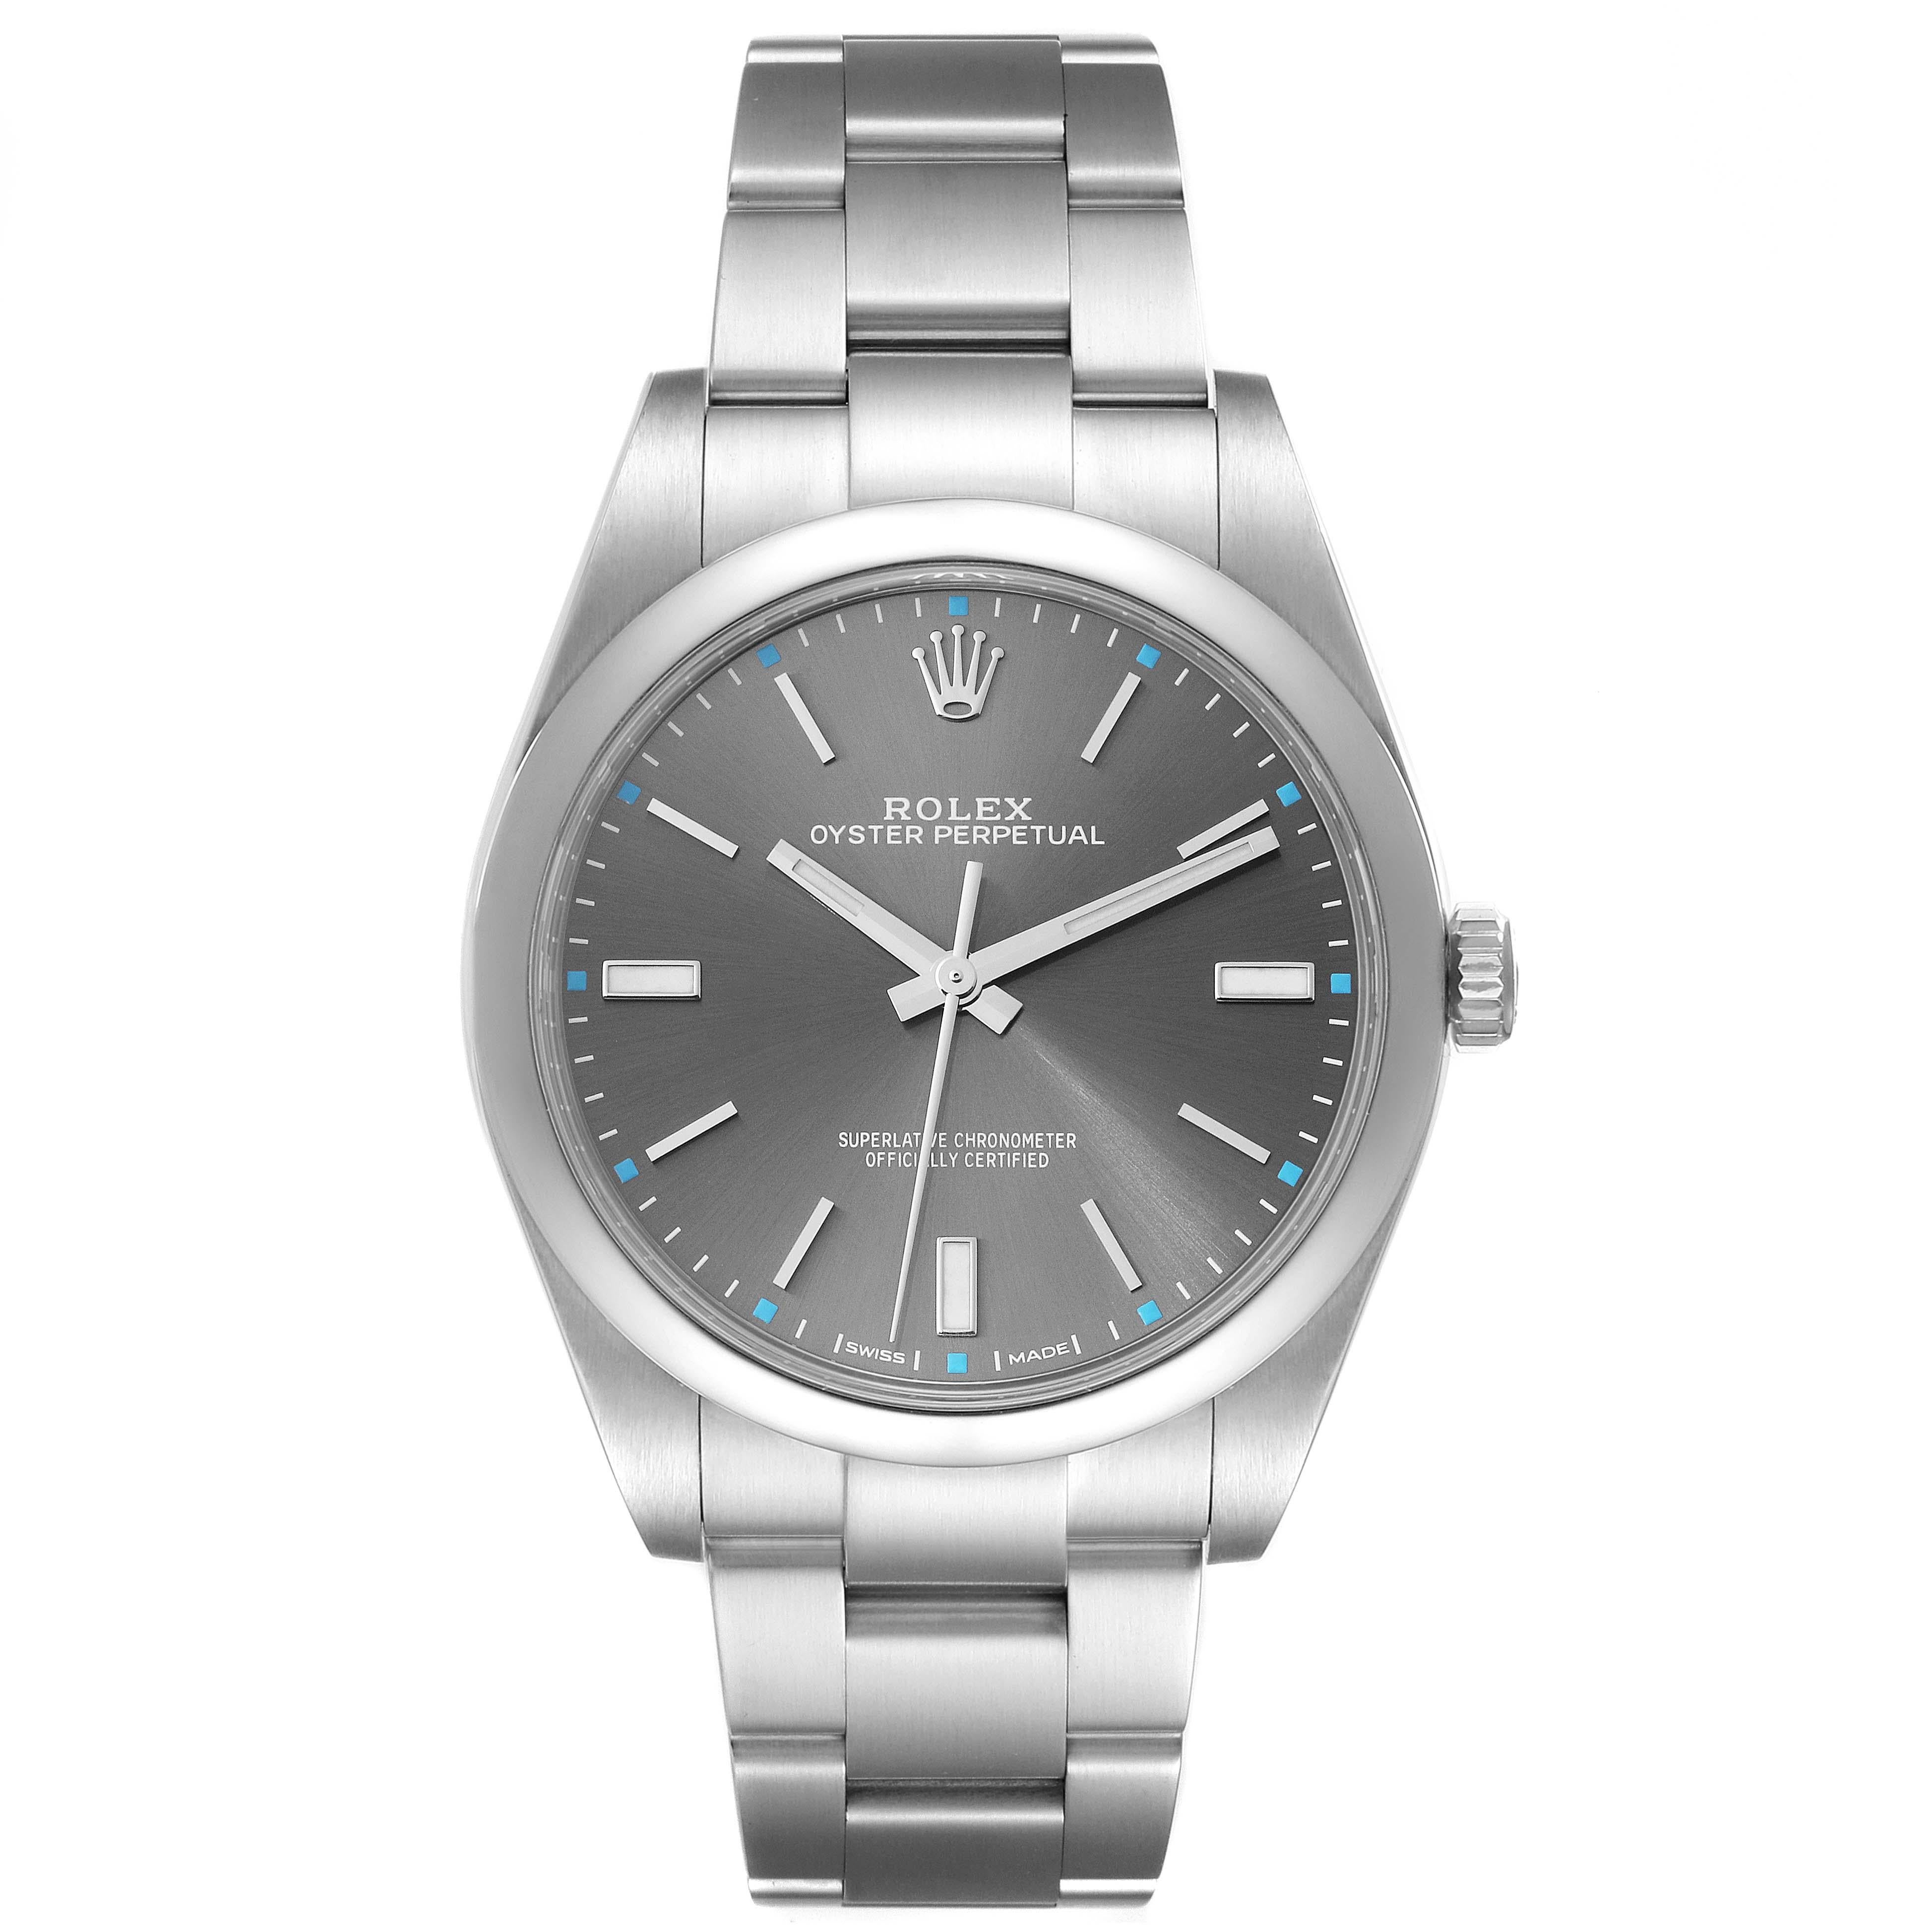 Rolex Oyster Perpetual 39 Rhodium Dial Steel Mens Watch 114300 Box Card. Officially certified chronometer automatic self-winding movement. Stainless steel case 39 mm in diameter. Rolex logo on the crown. Stainless steel smooth domed bezel. Scratch